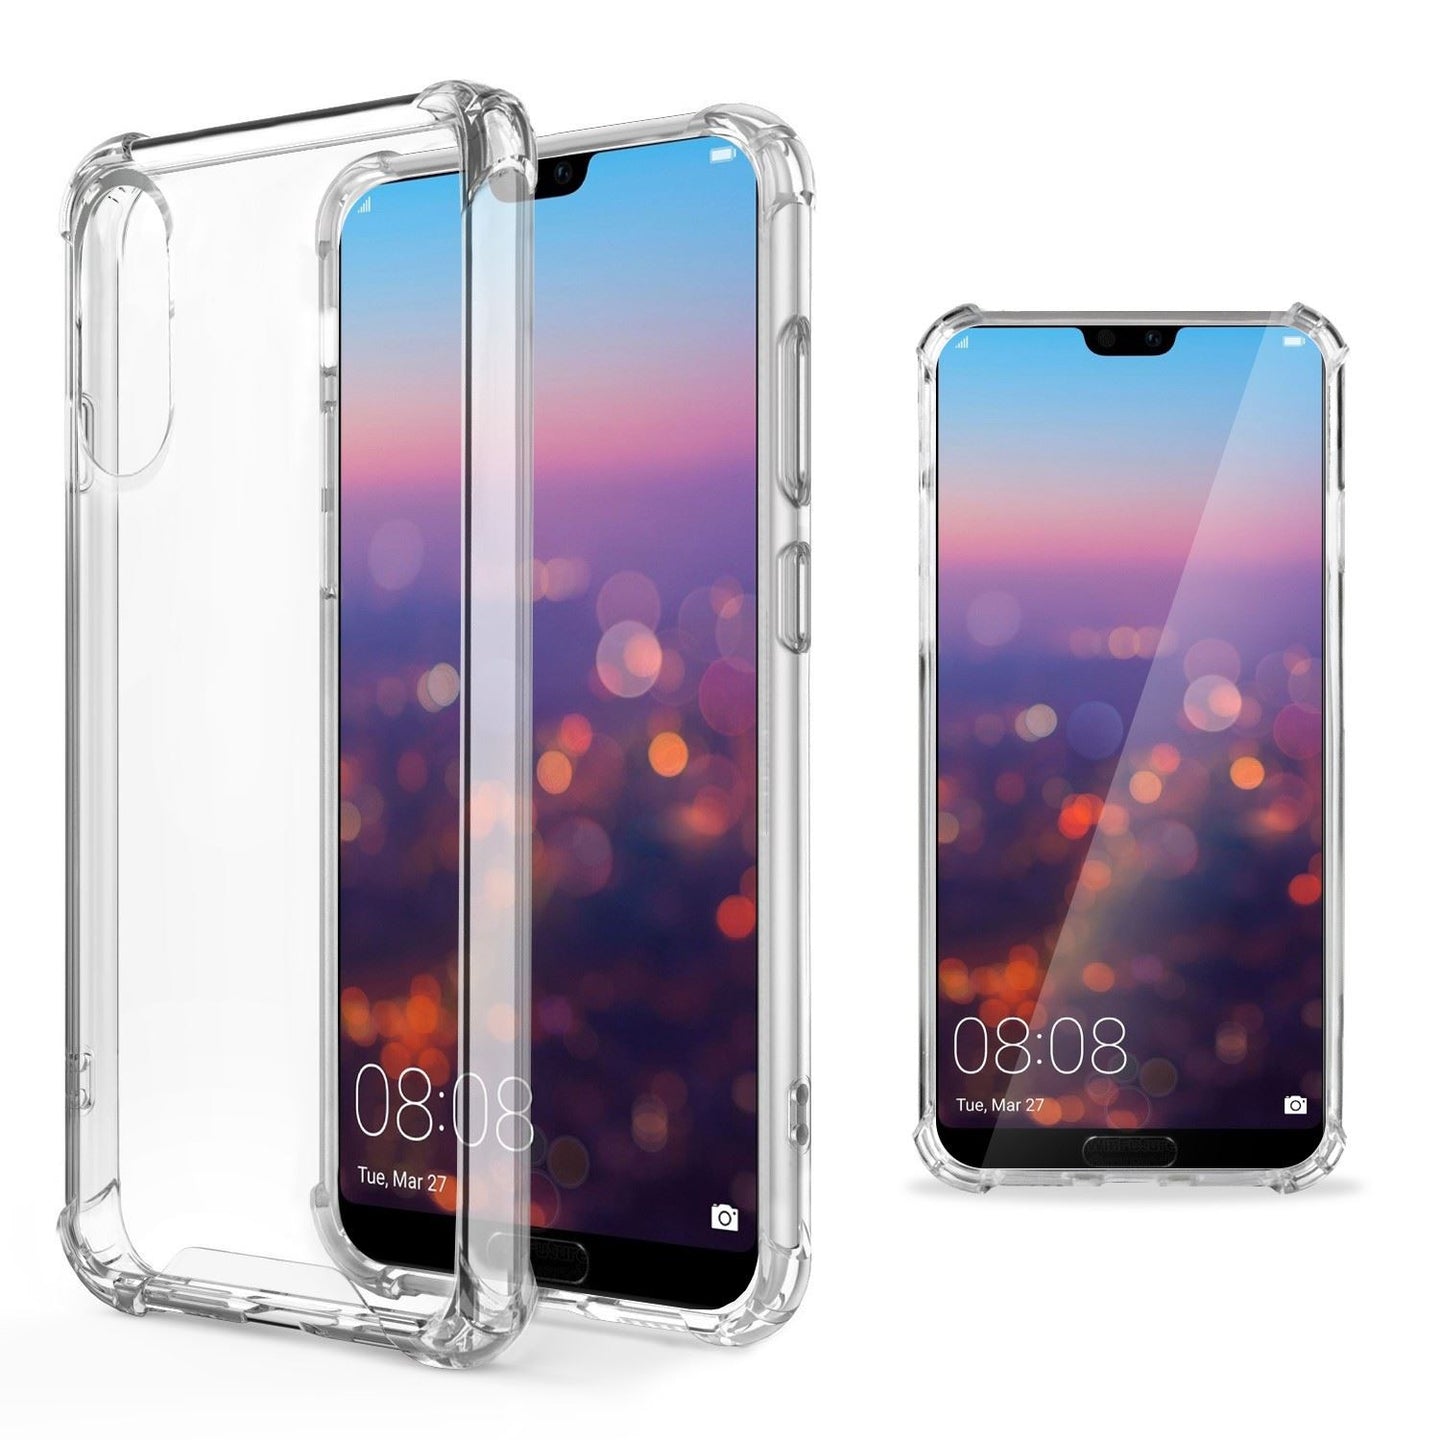 Moozy Shock Proof Silicone Case for Huawei P20 Pro - Transparent Crystal Clear Phone Case Soft TPU Cover